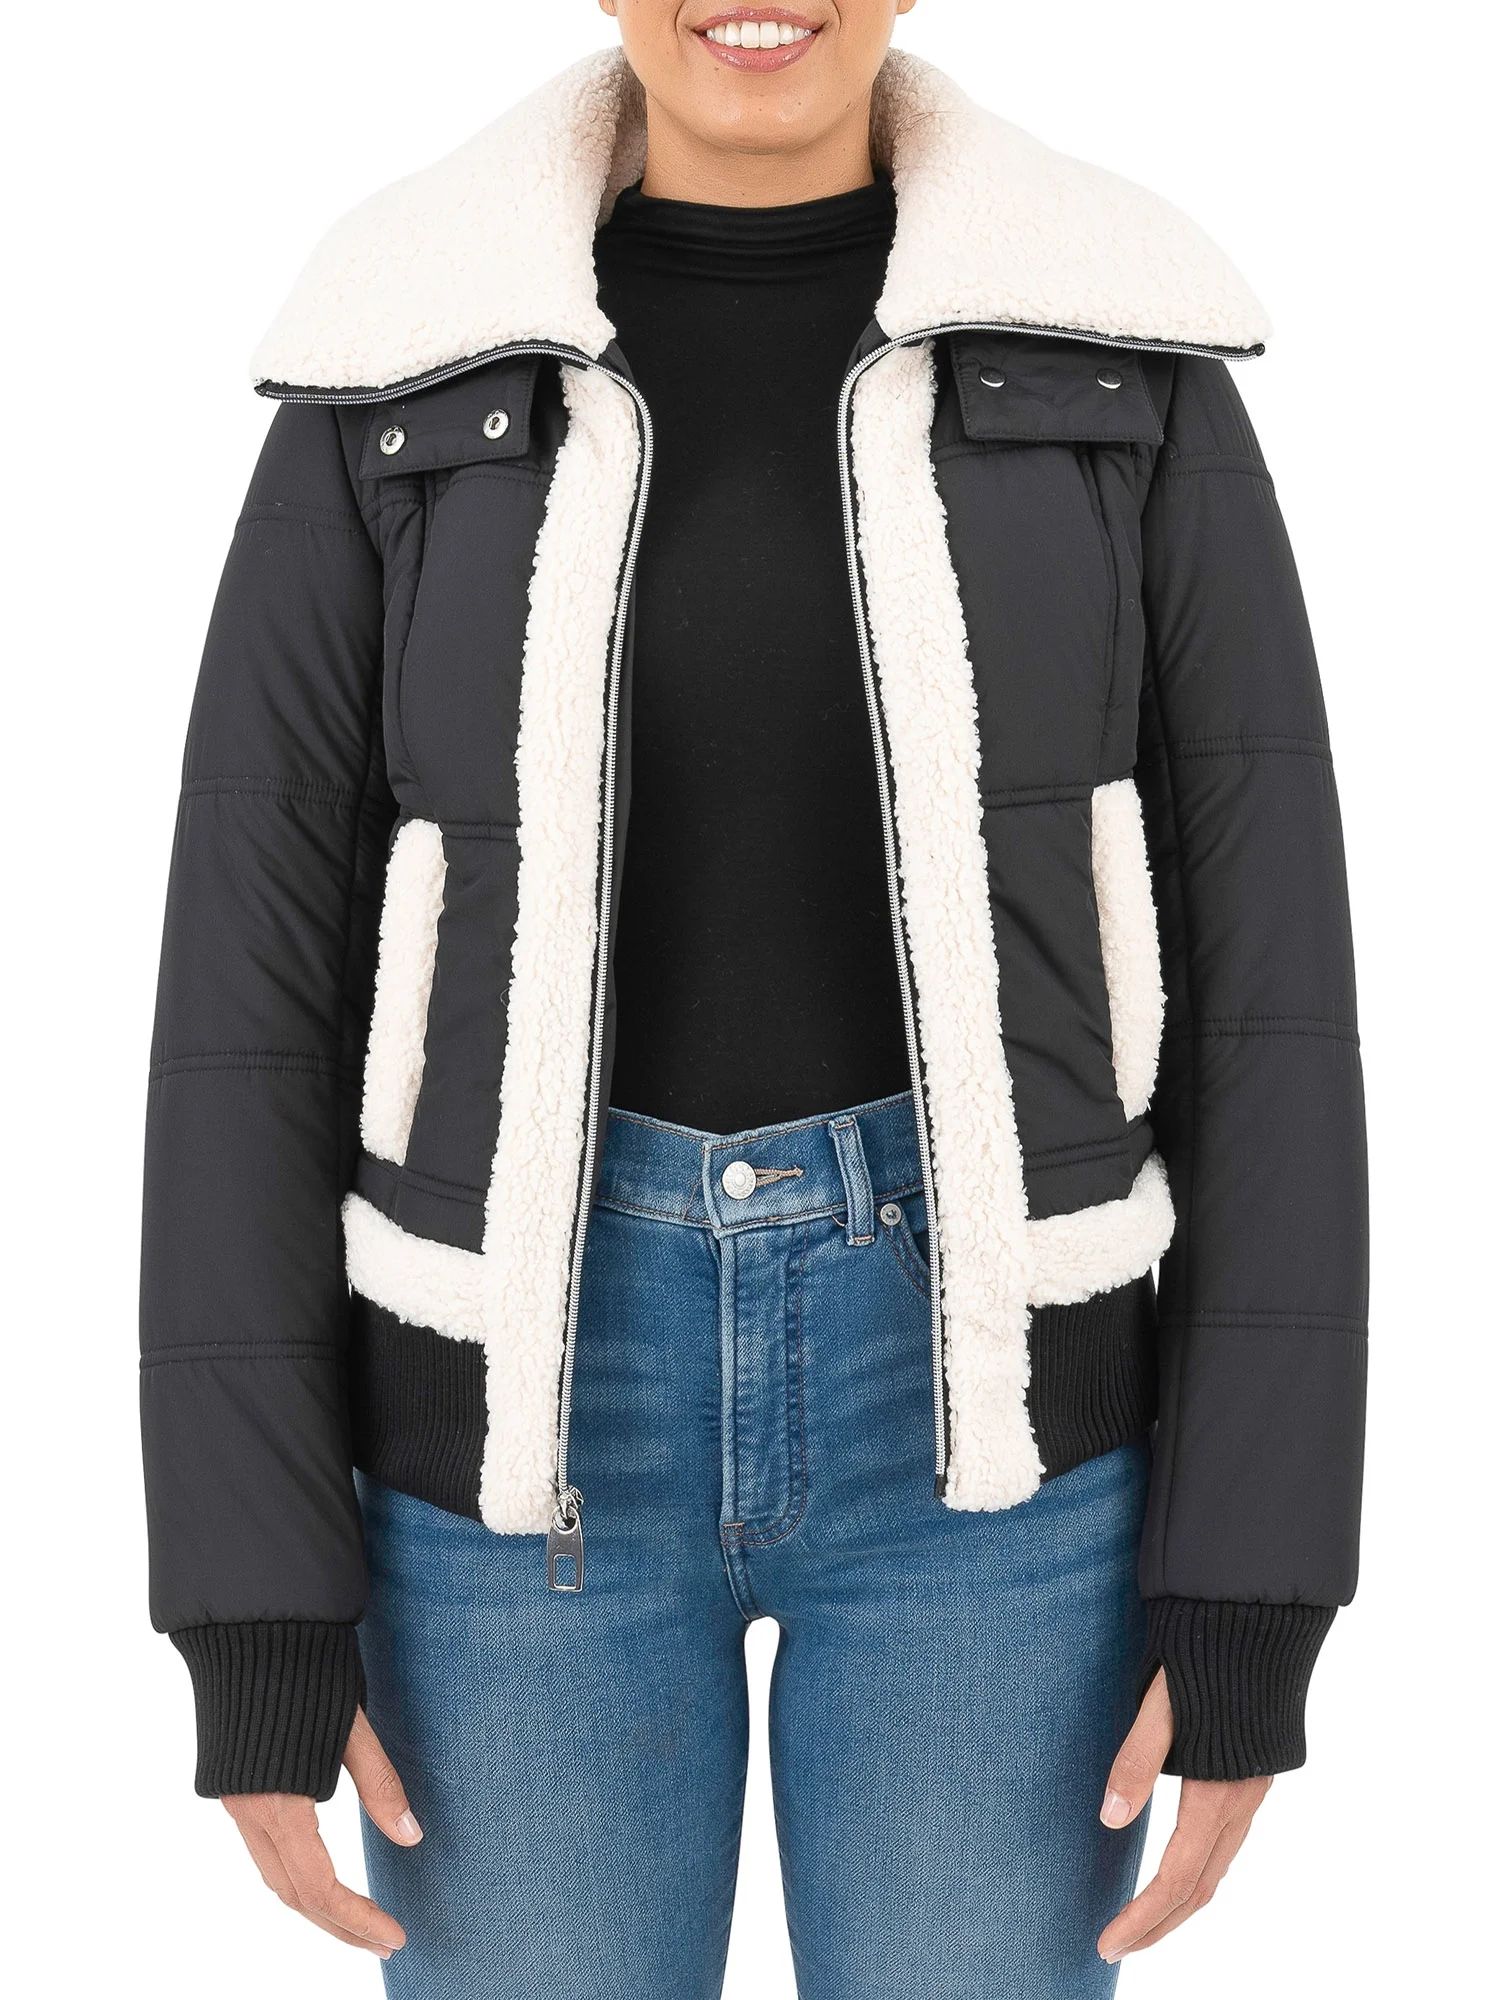 Cyn & Luca Women's Sustainable Bomber Jacket with Sherpa Trim | Walmart (US)